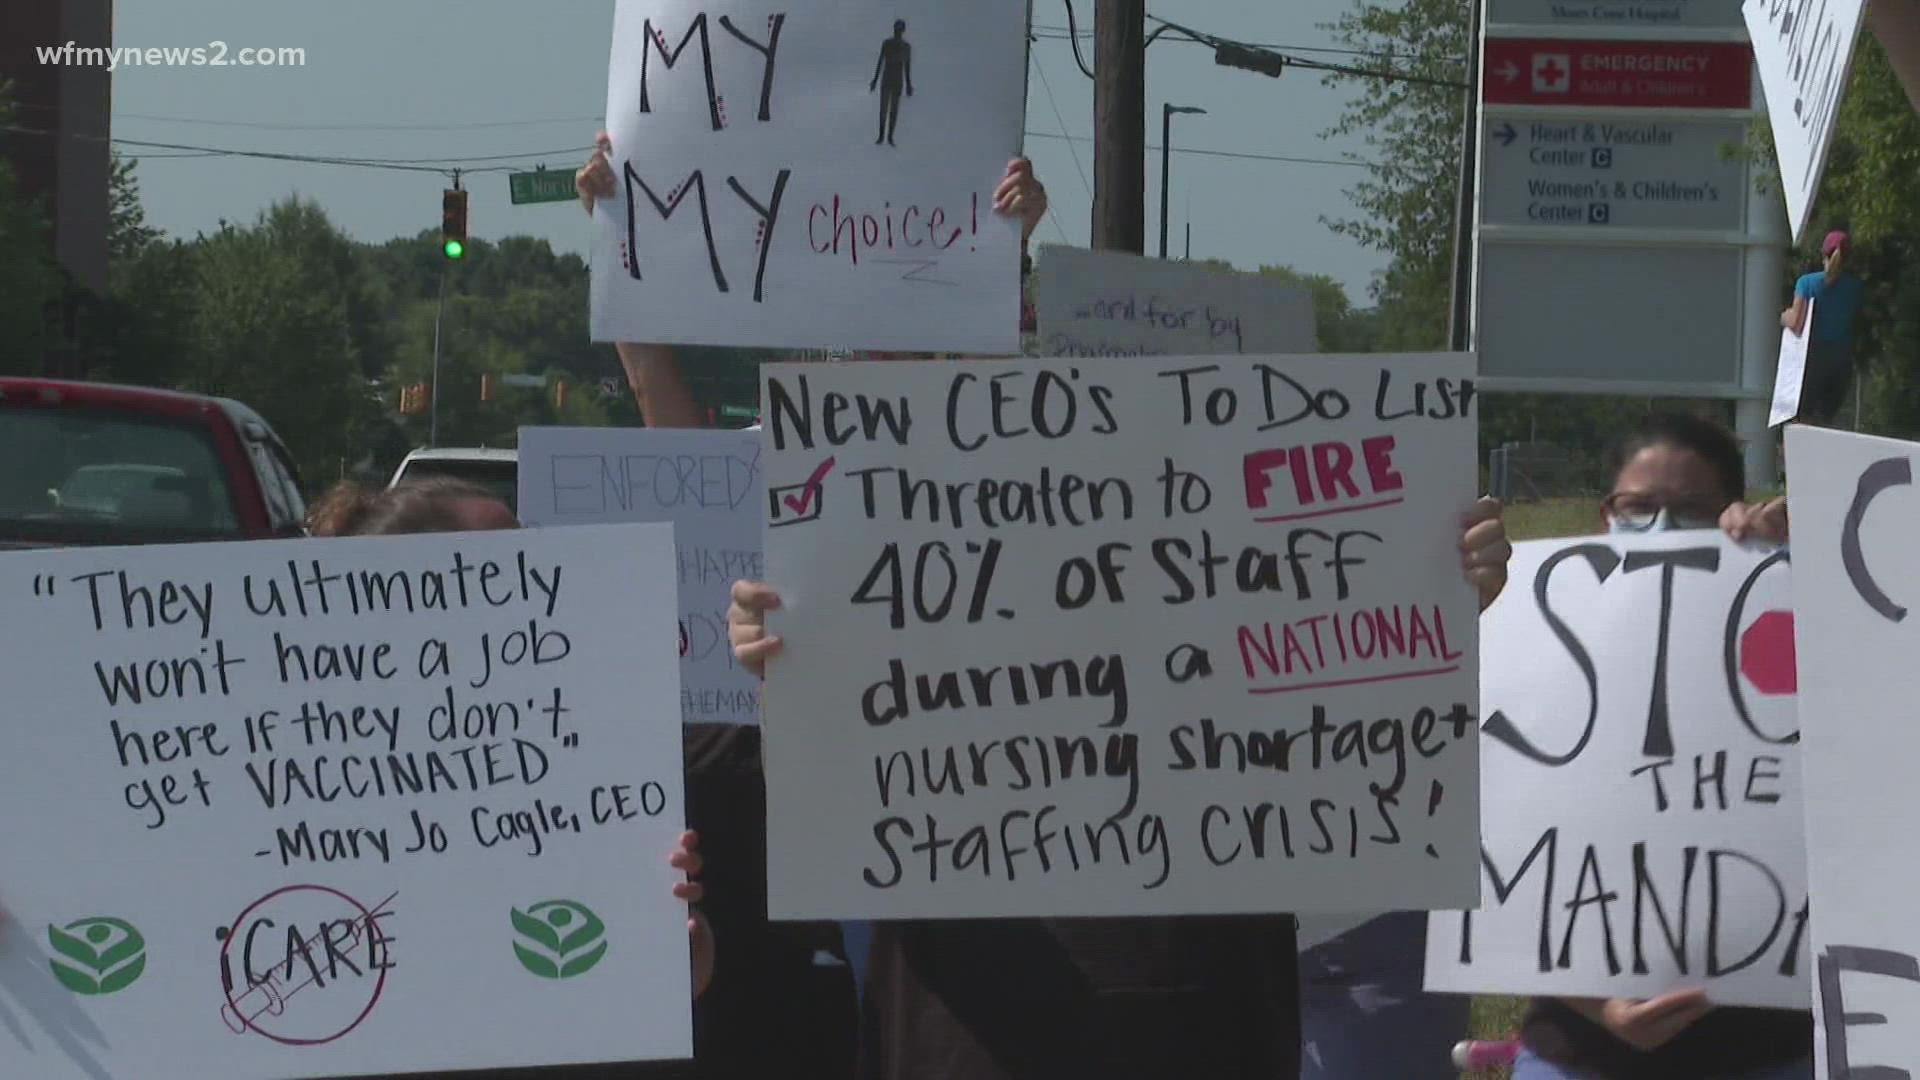 Cone Health employees against the vaccine mandate were protesting in front of the hospital Thursday.